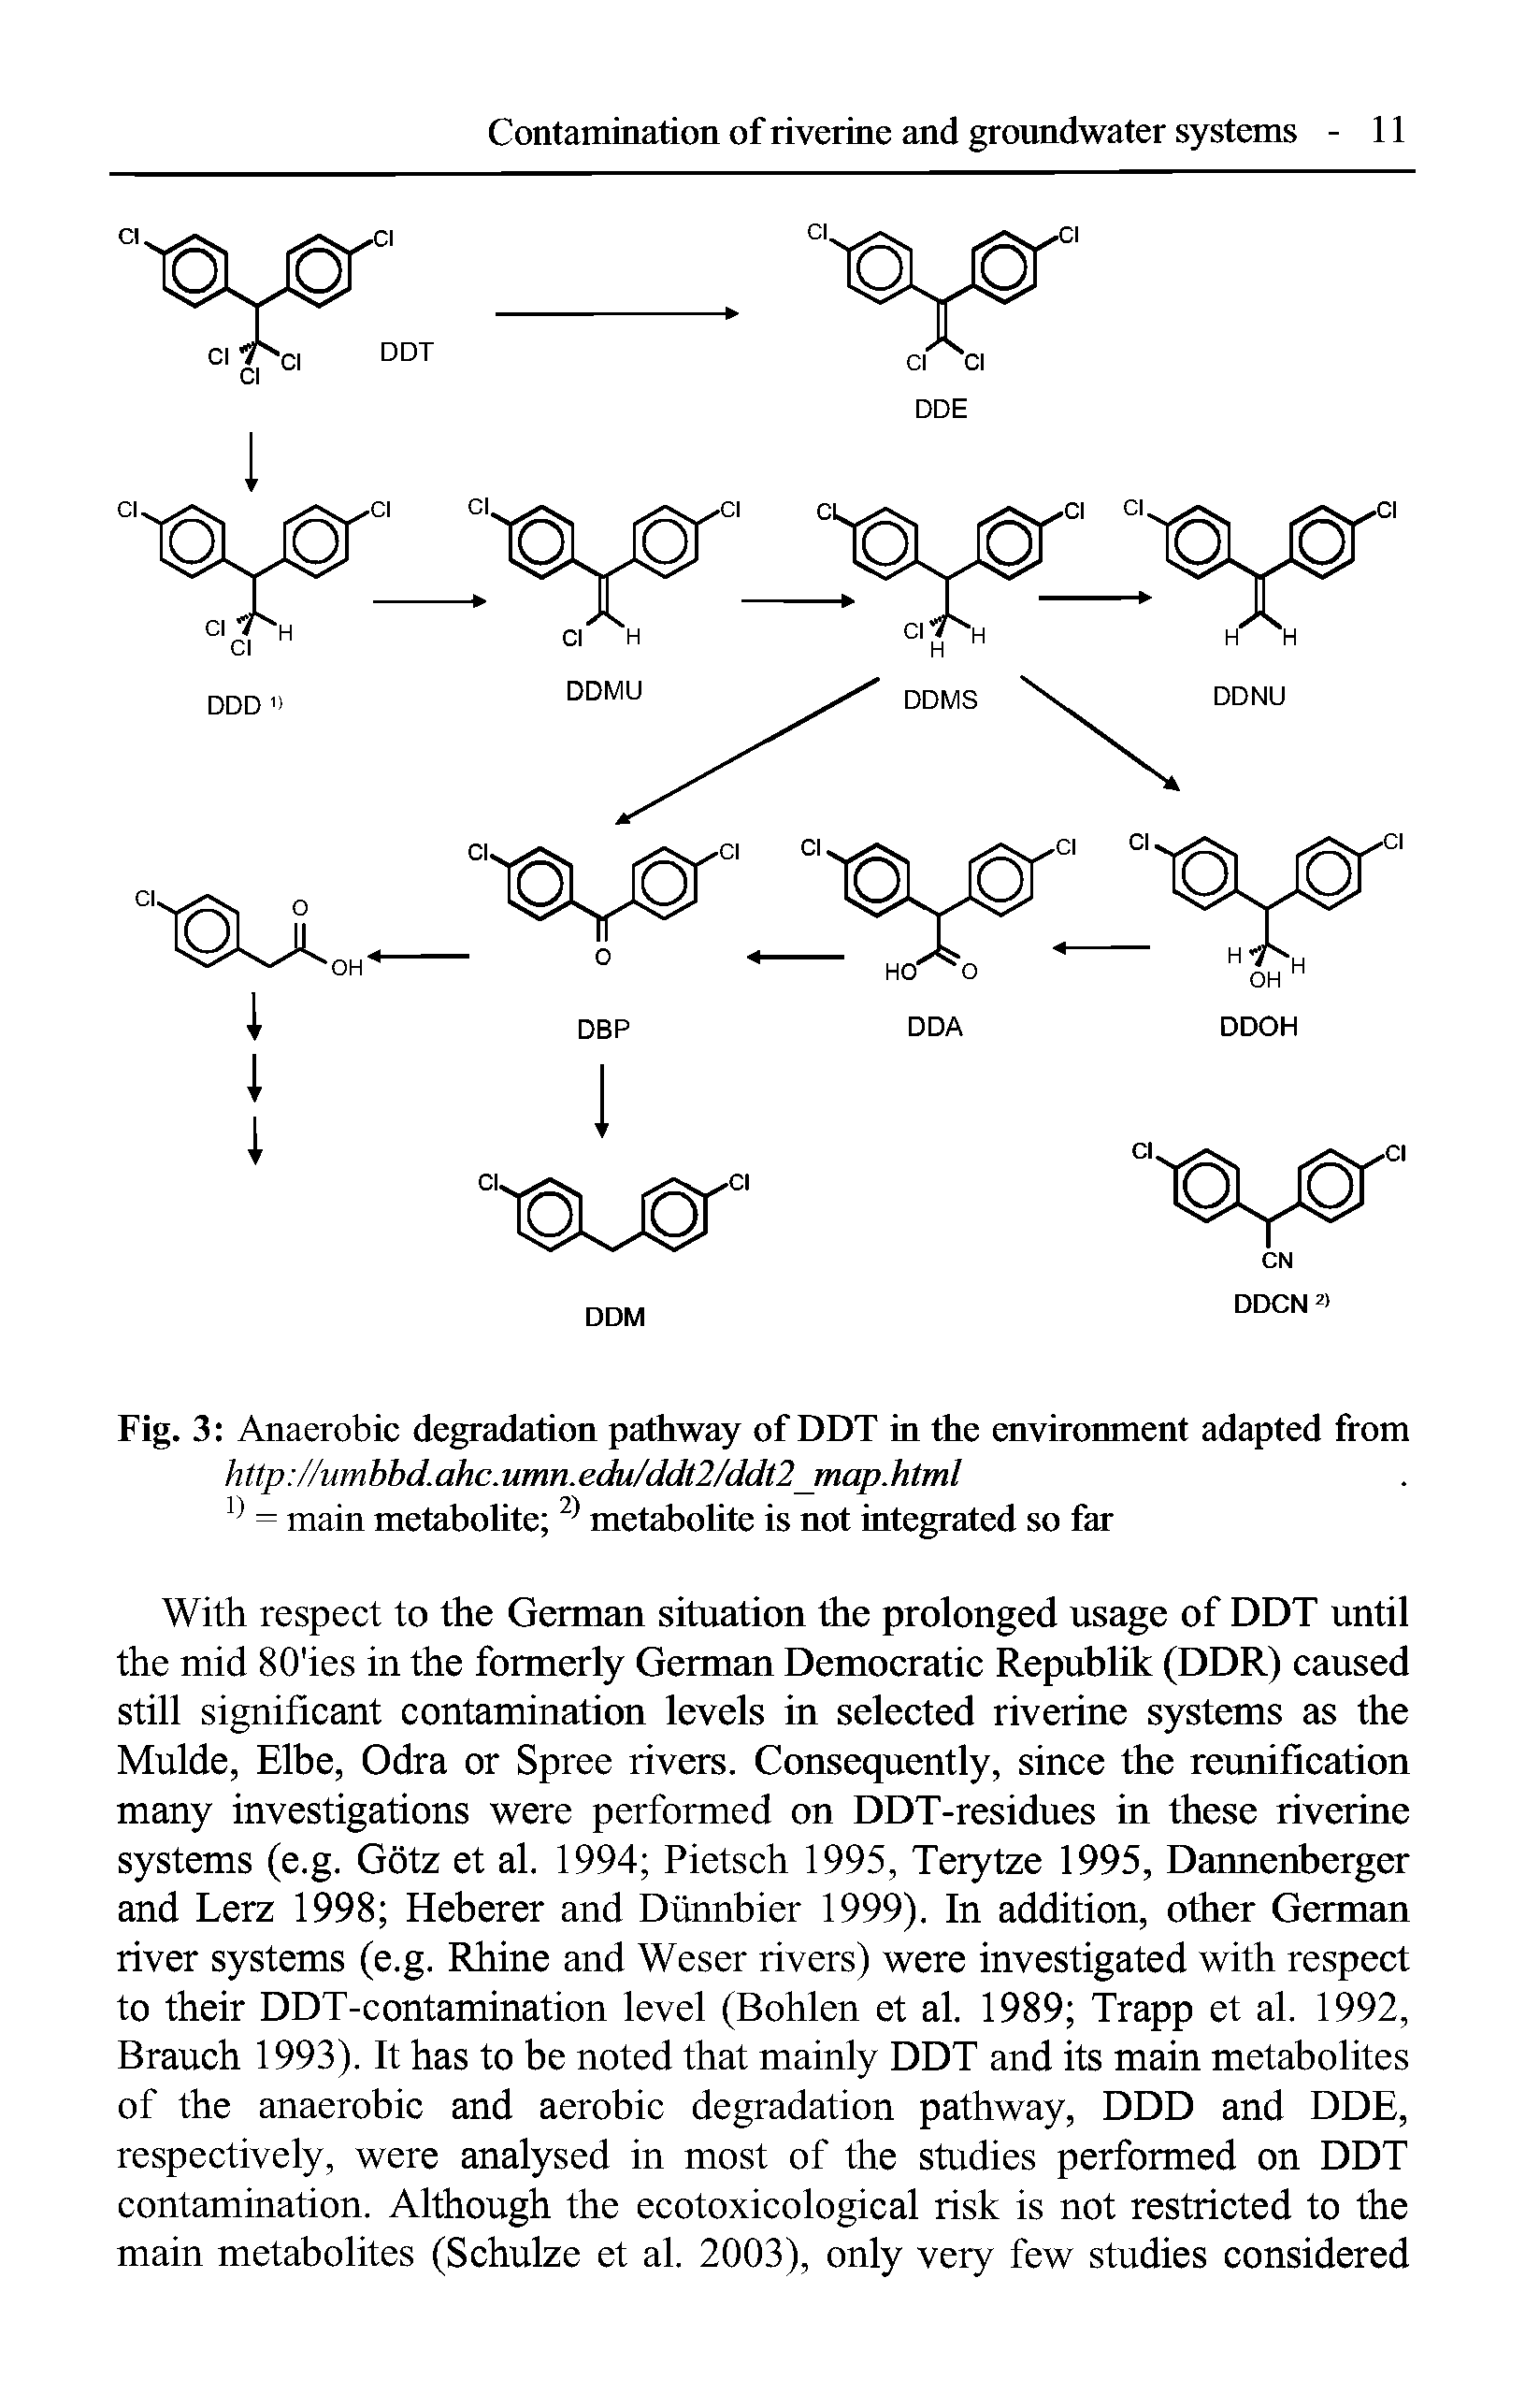 Fig. 3 Anaerobic degradation pathway of DDT in the environment adapted from h ttp //um bbd. ahc. umn. edu/ddt2/ddt2 map.html -l = main metabolite 2> metabolite is not integrated so far...